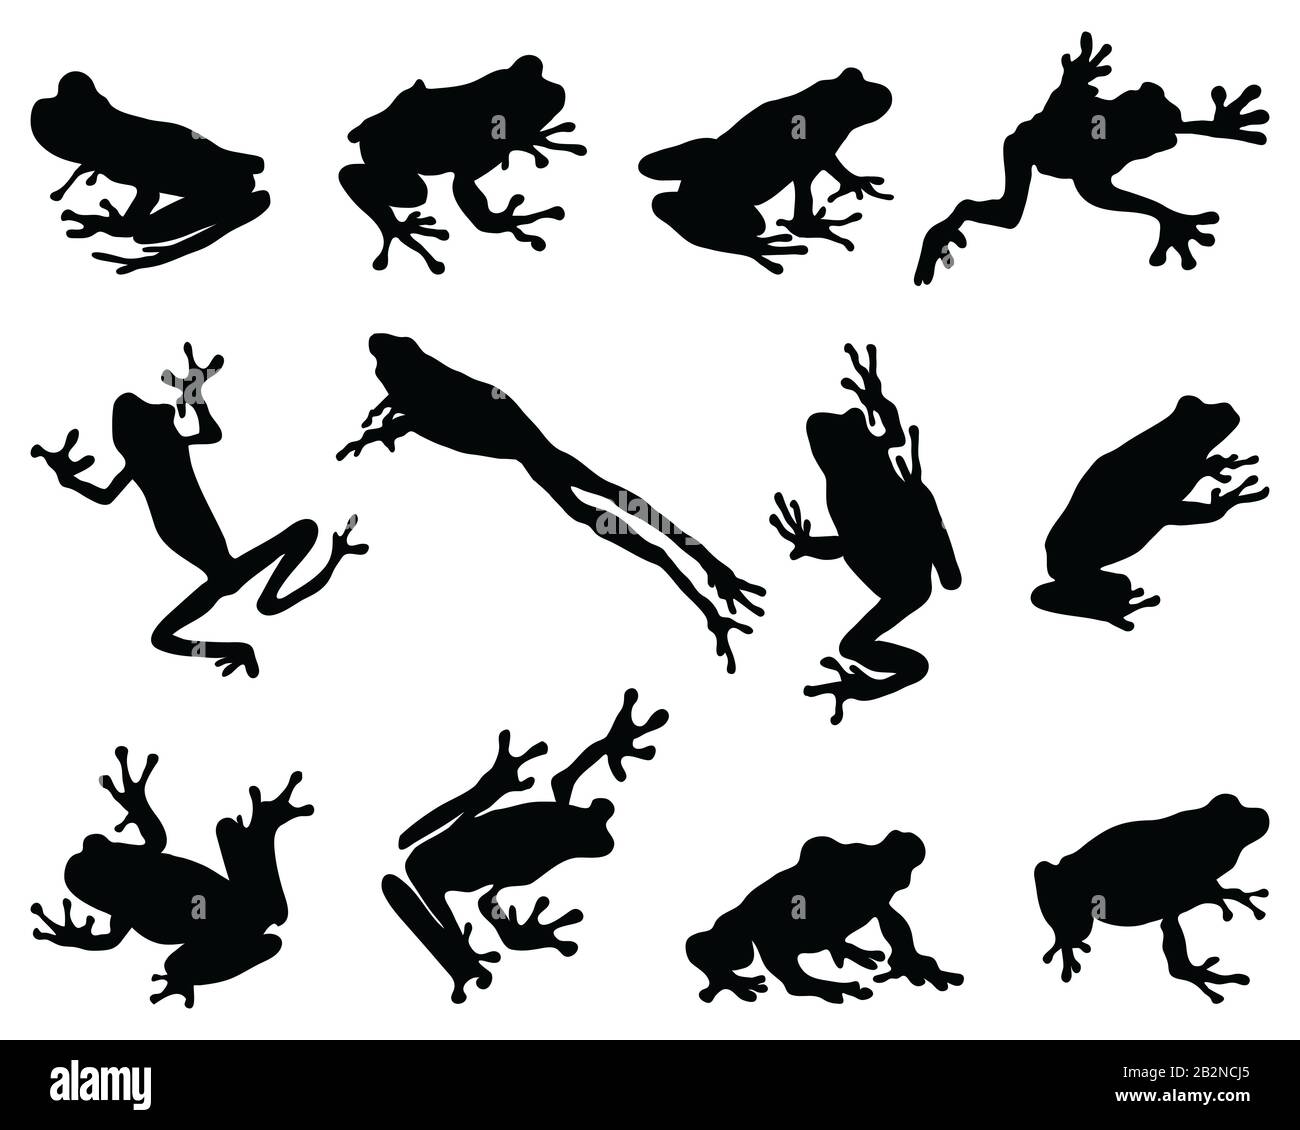 Black silhouettes of frog on a white background Stock Photo